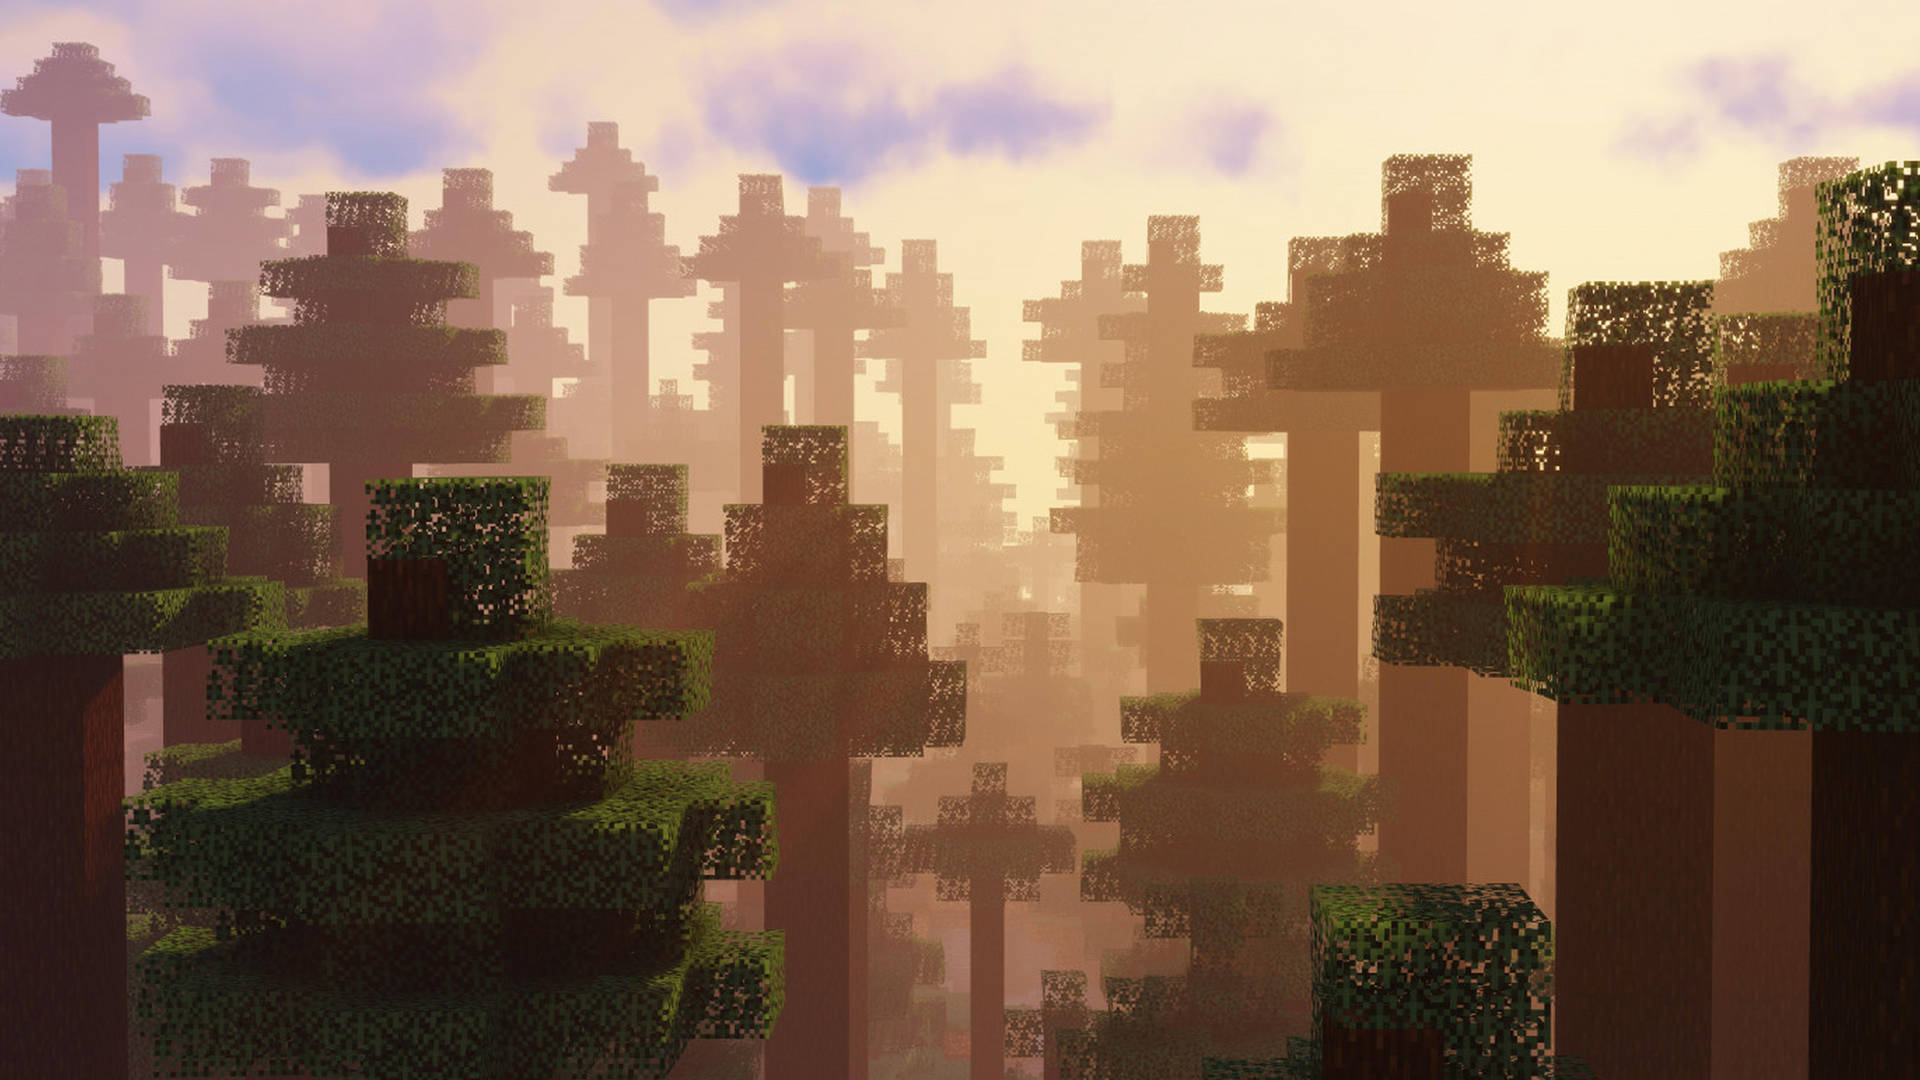 Forest Of Giant Trees 2560x1440 Minecraft Background